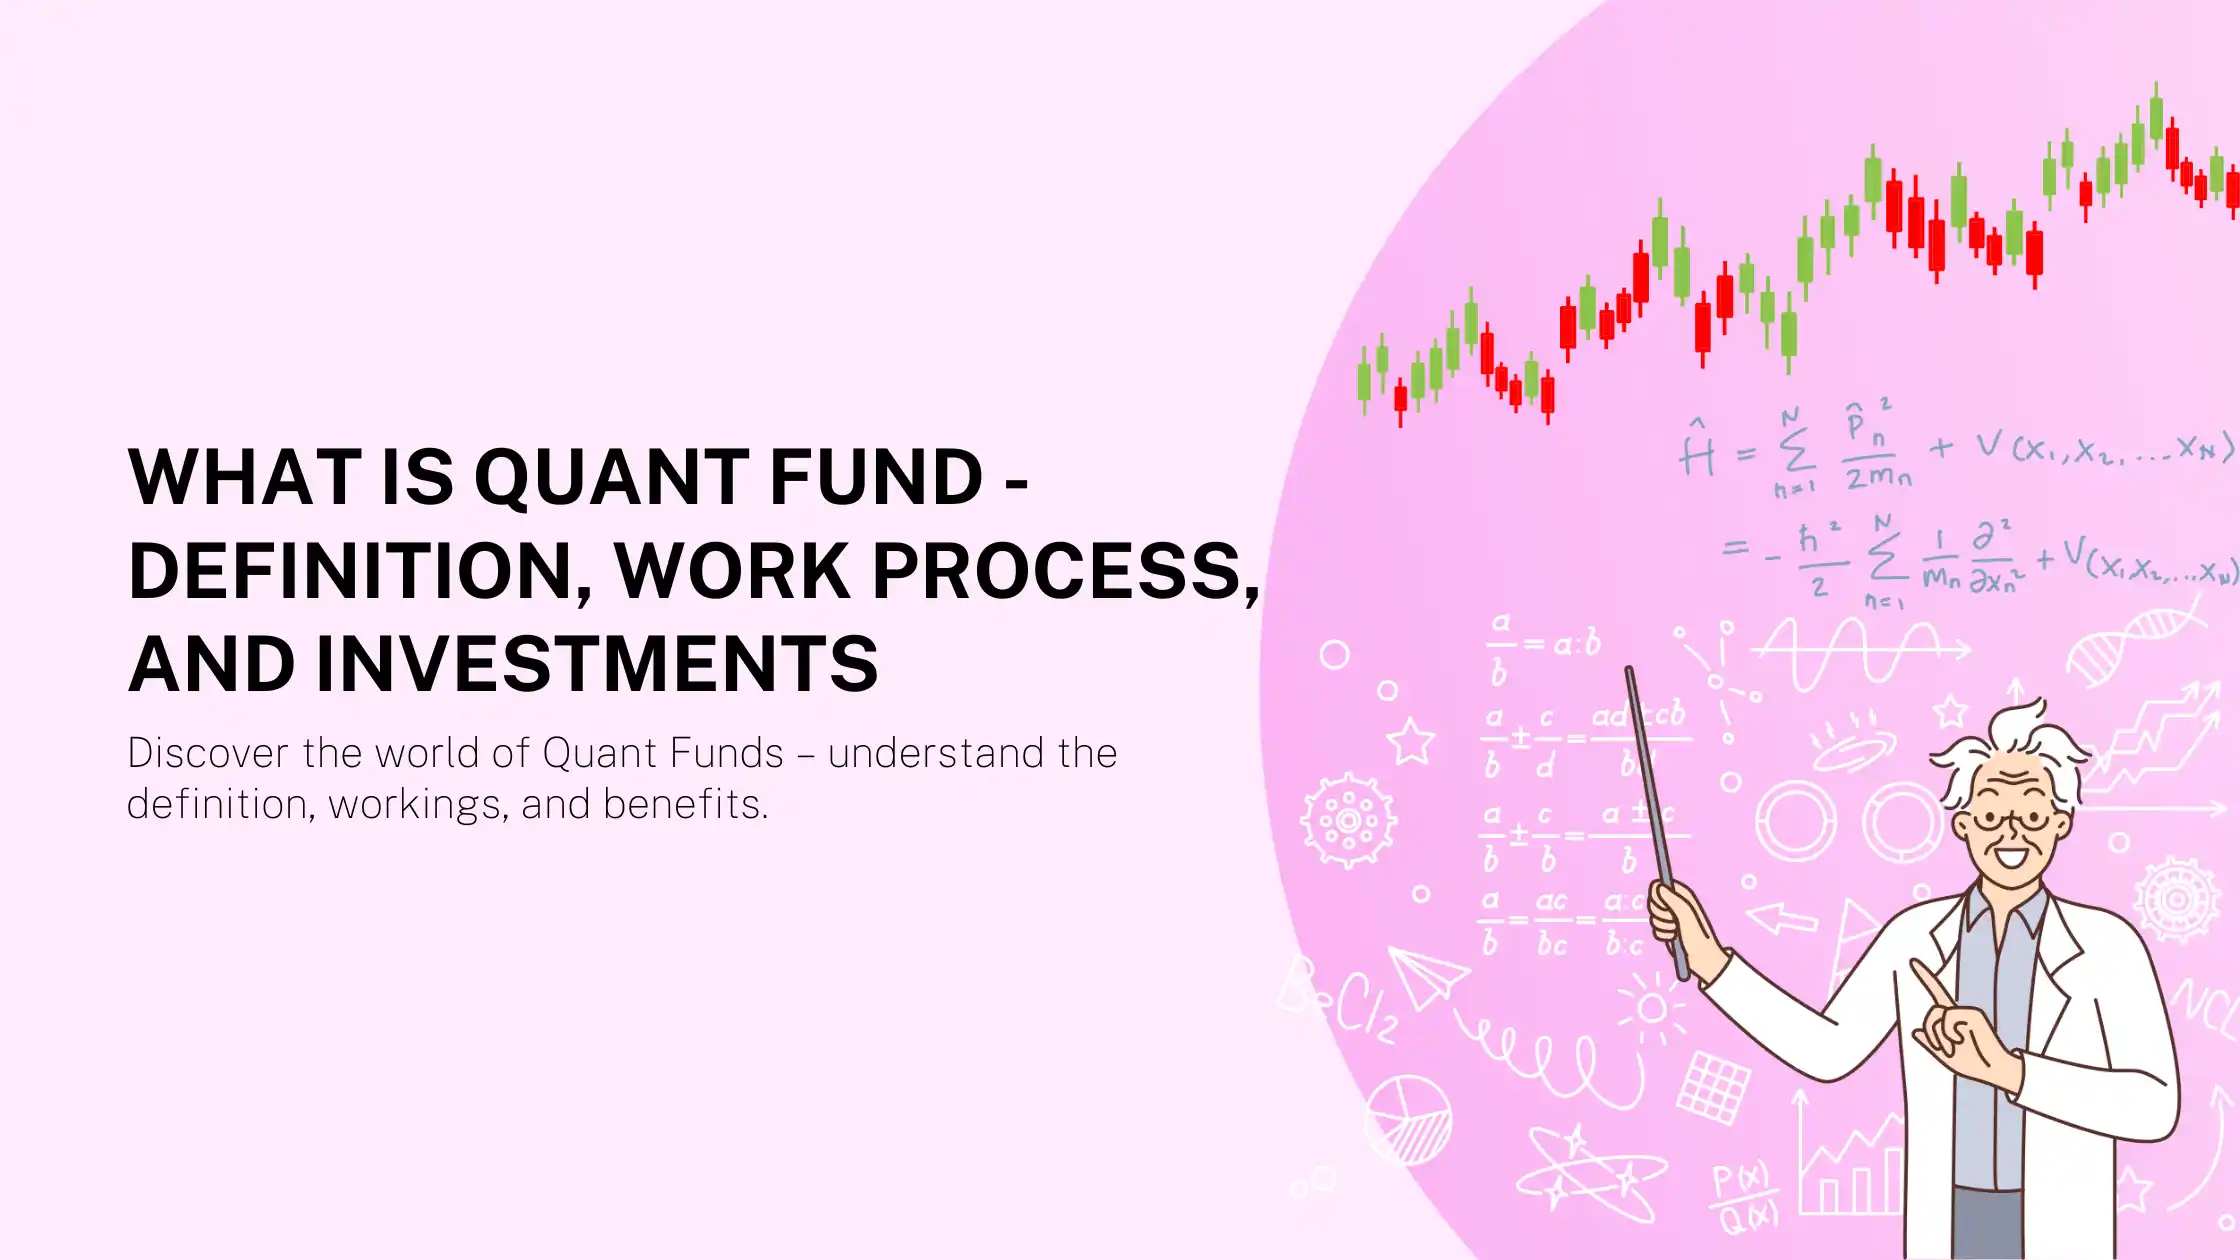 What is Quant Fund - Definition, Work Process, and Investments